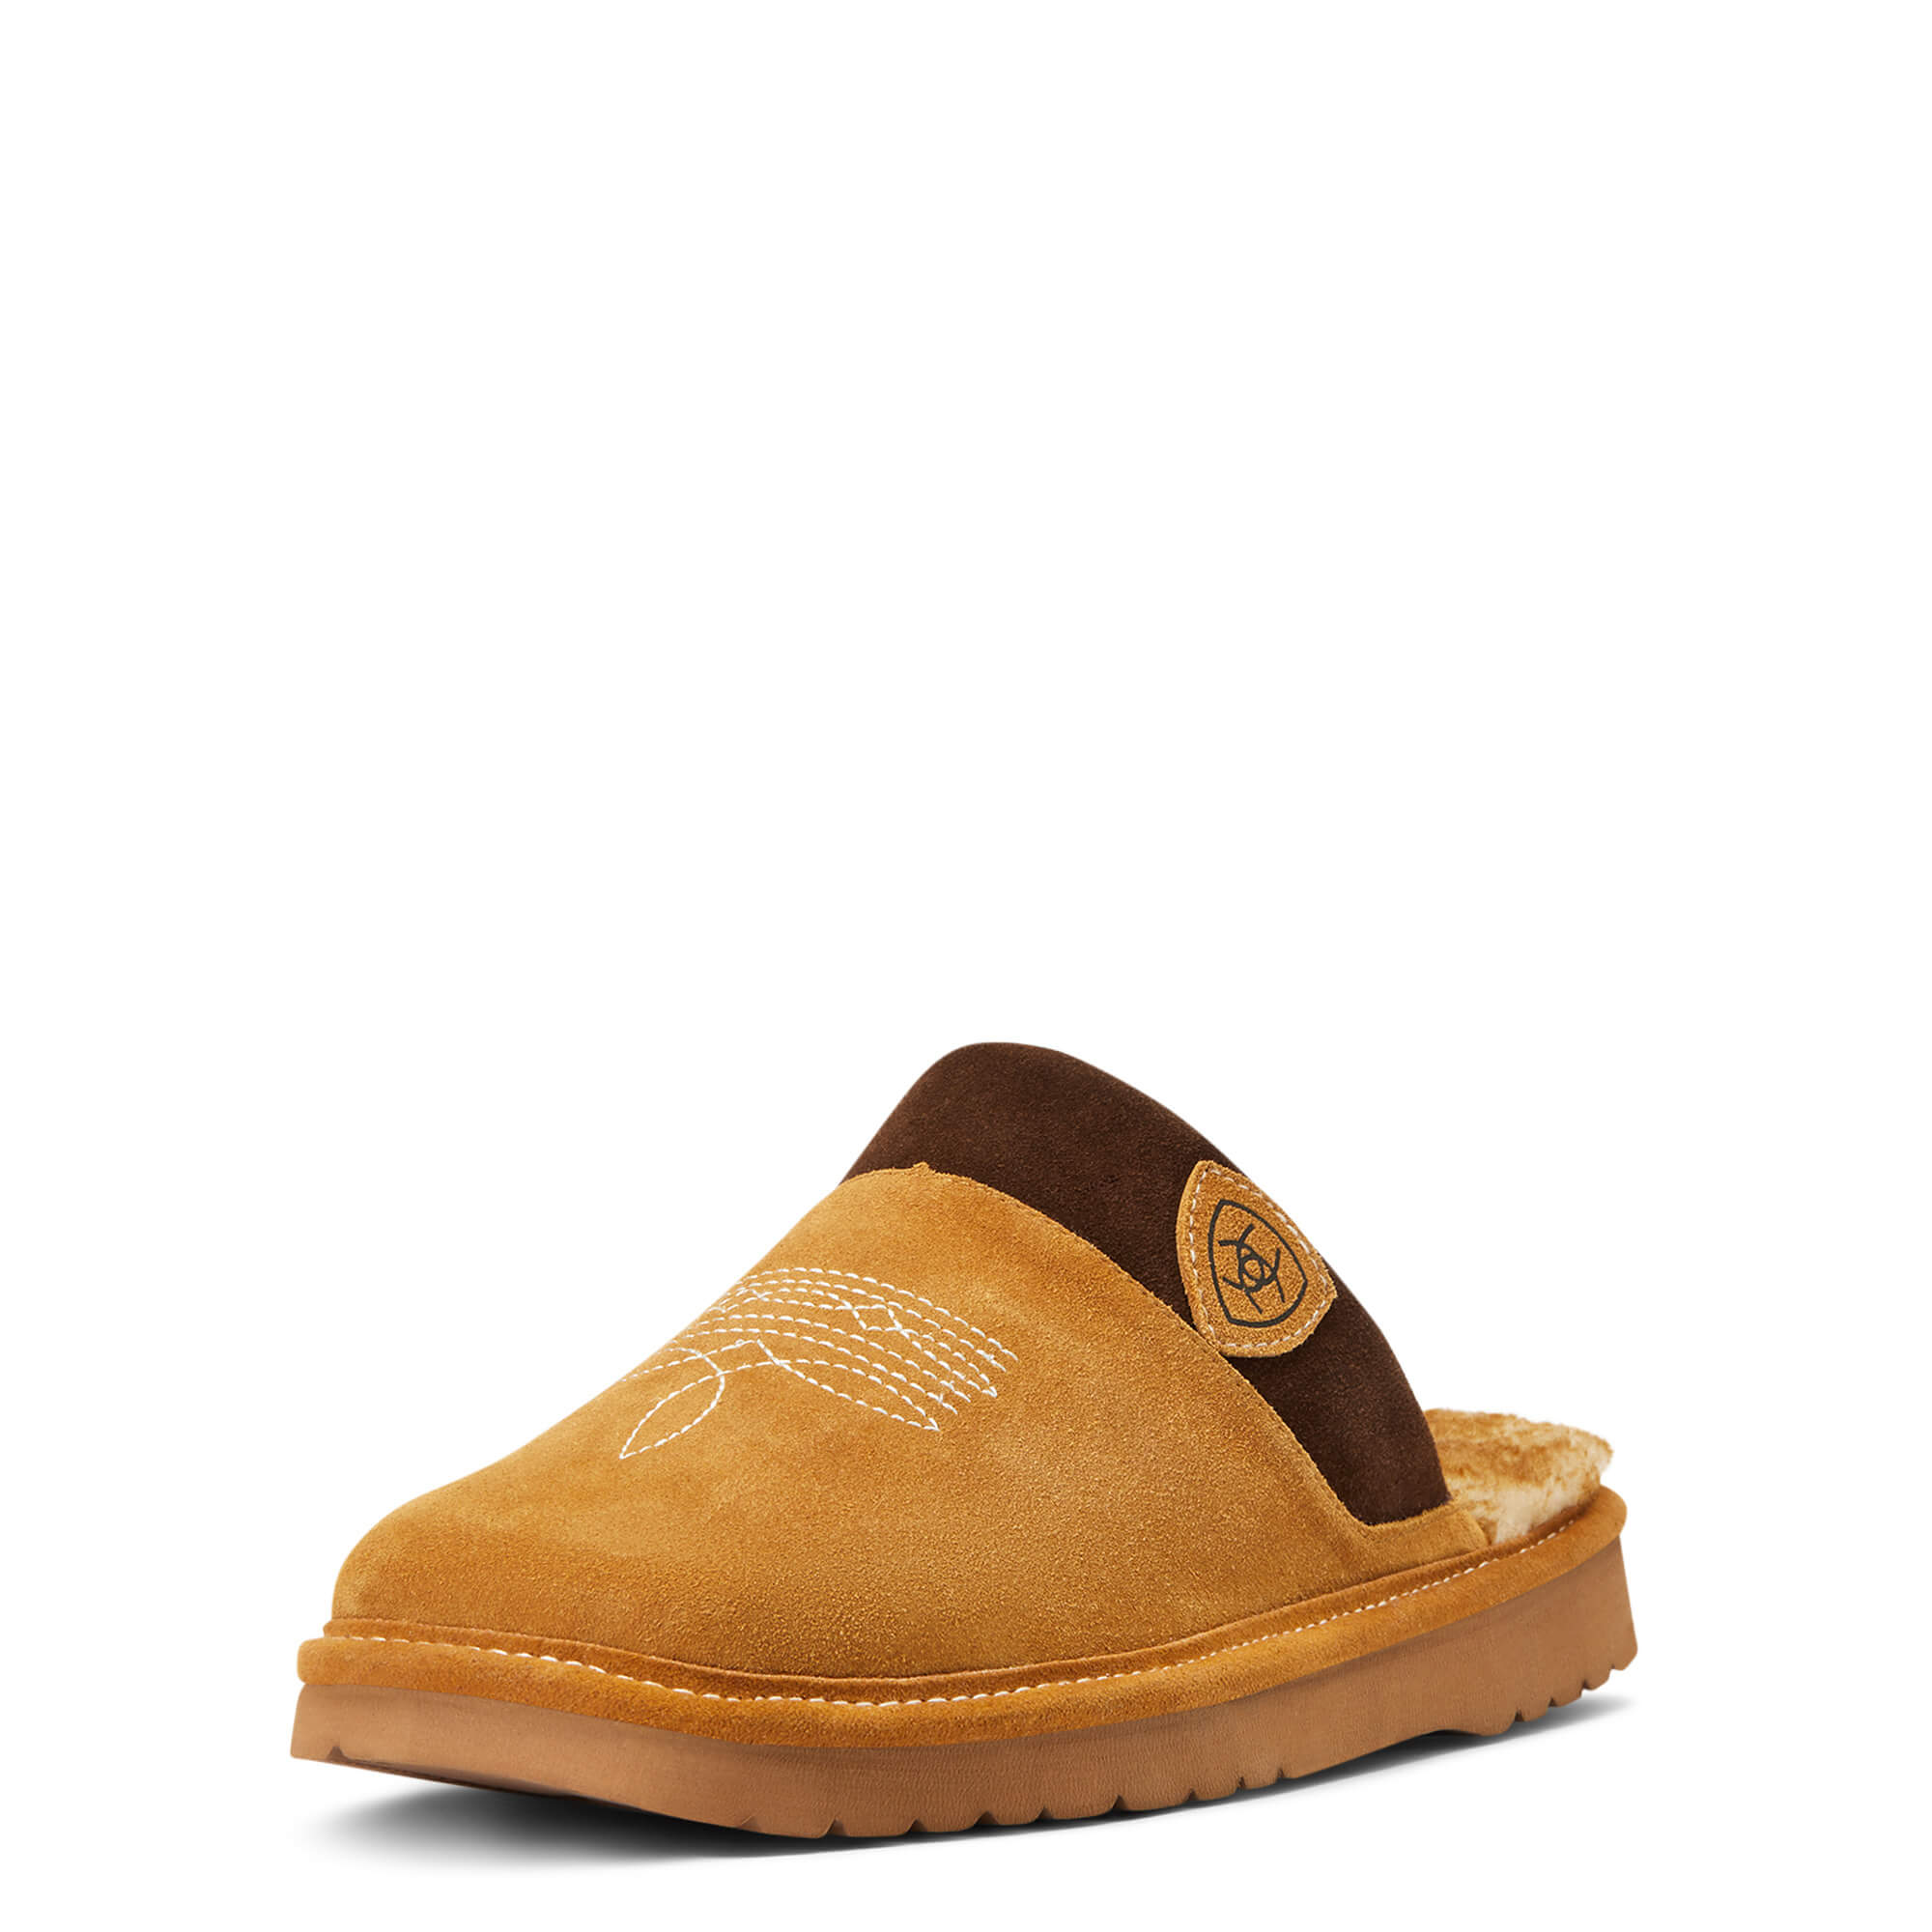 How Much Are Ariat Slippers? - Shoe Effect